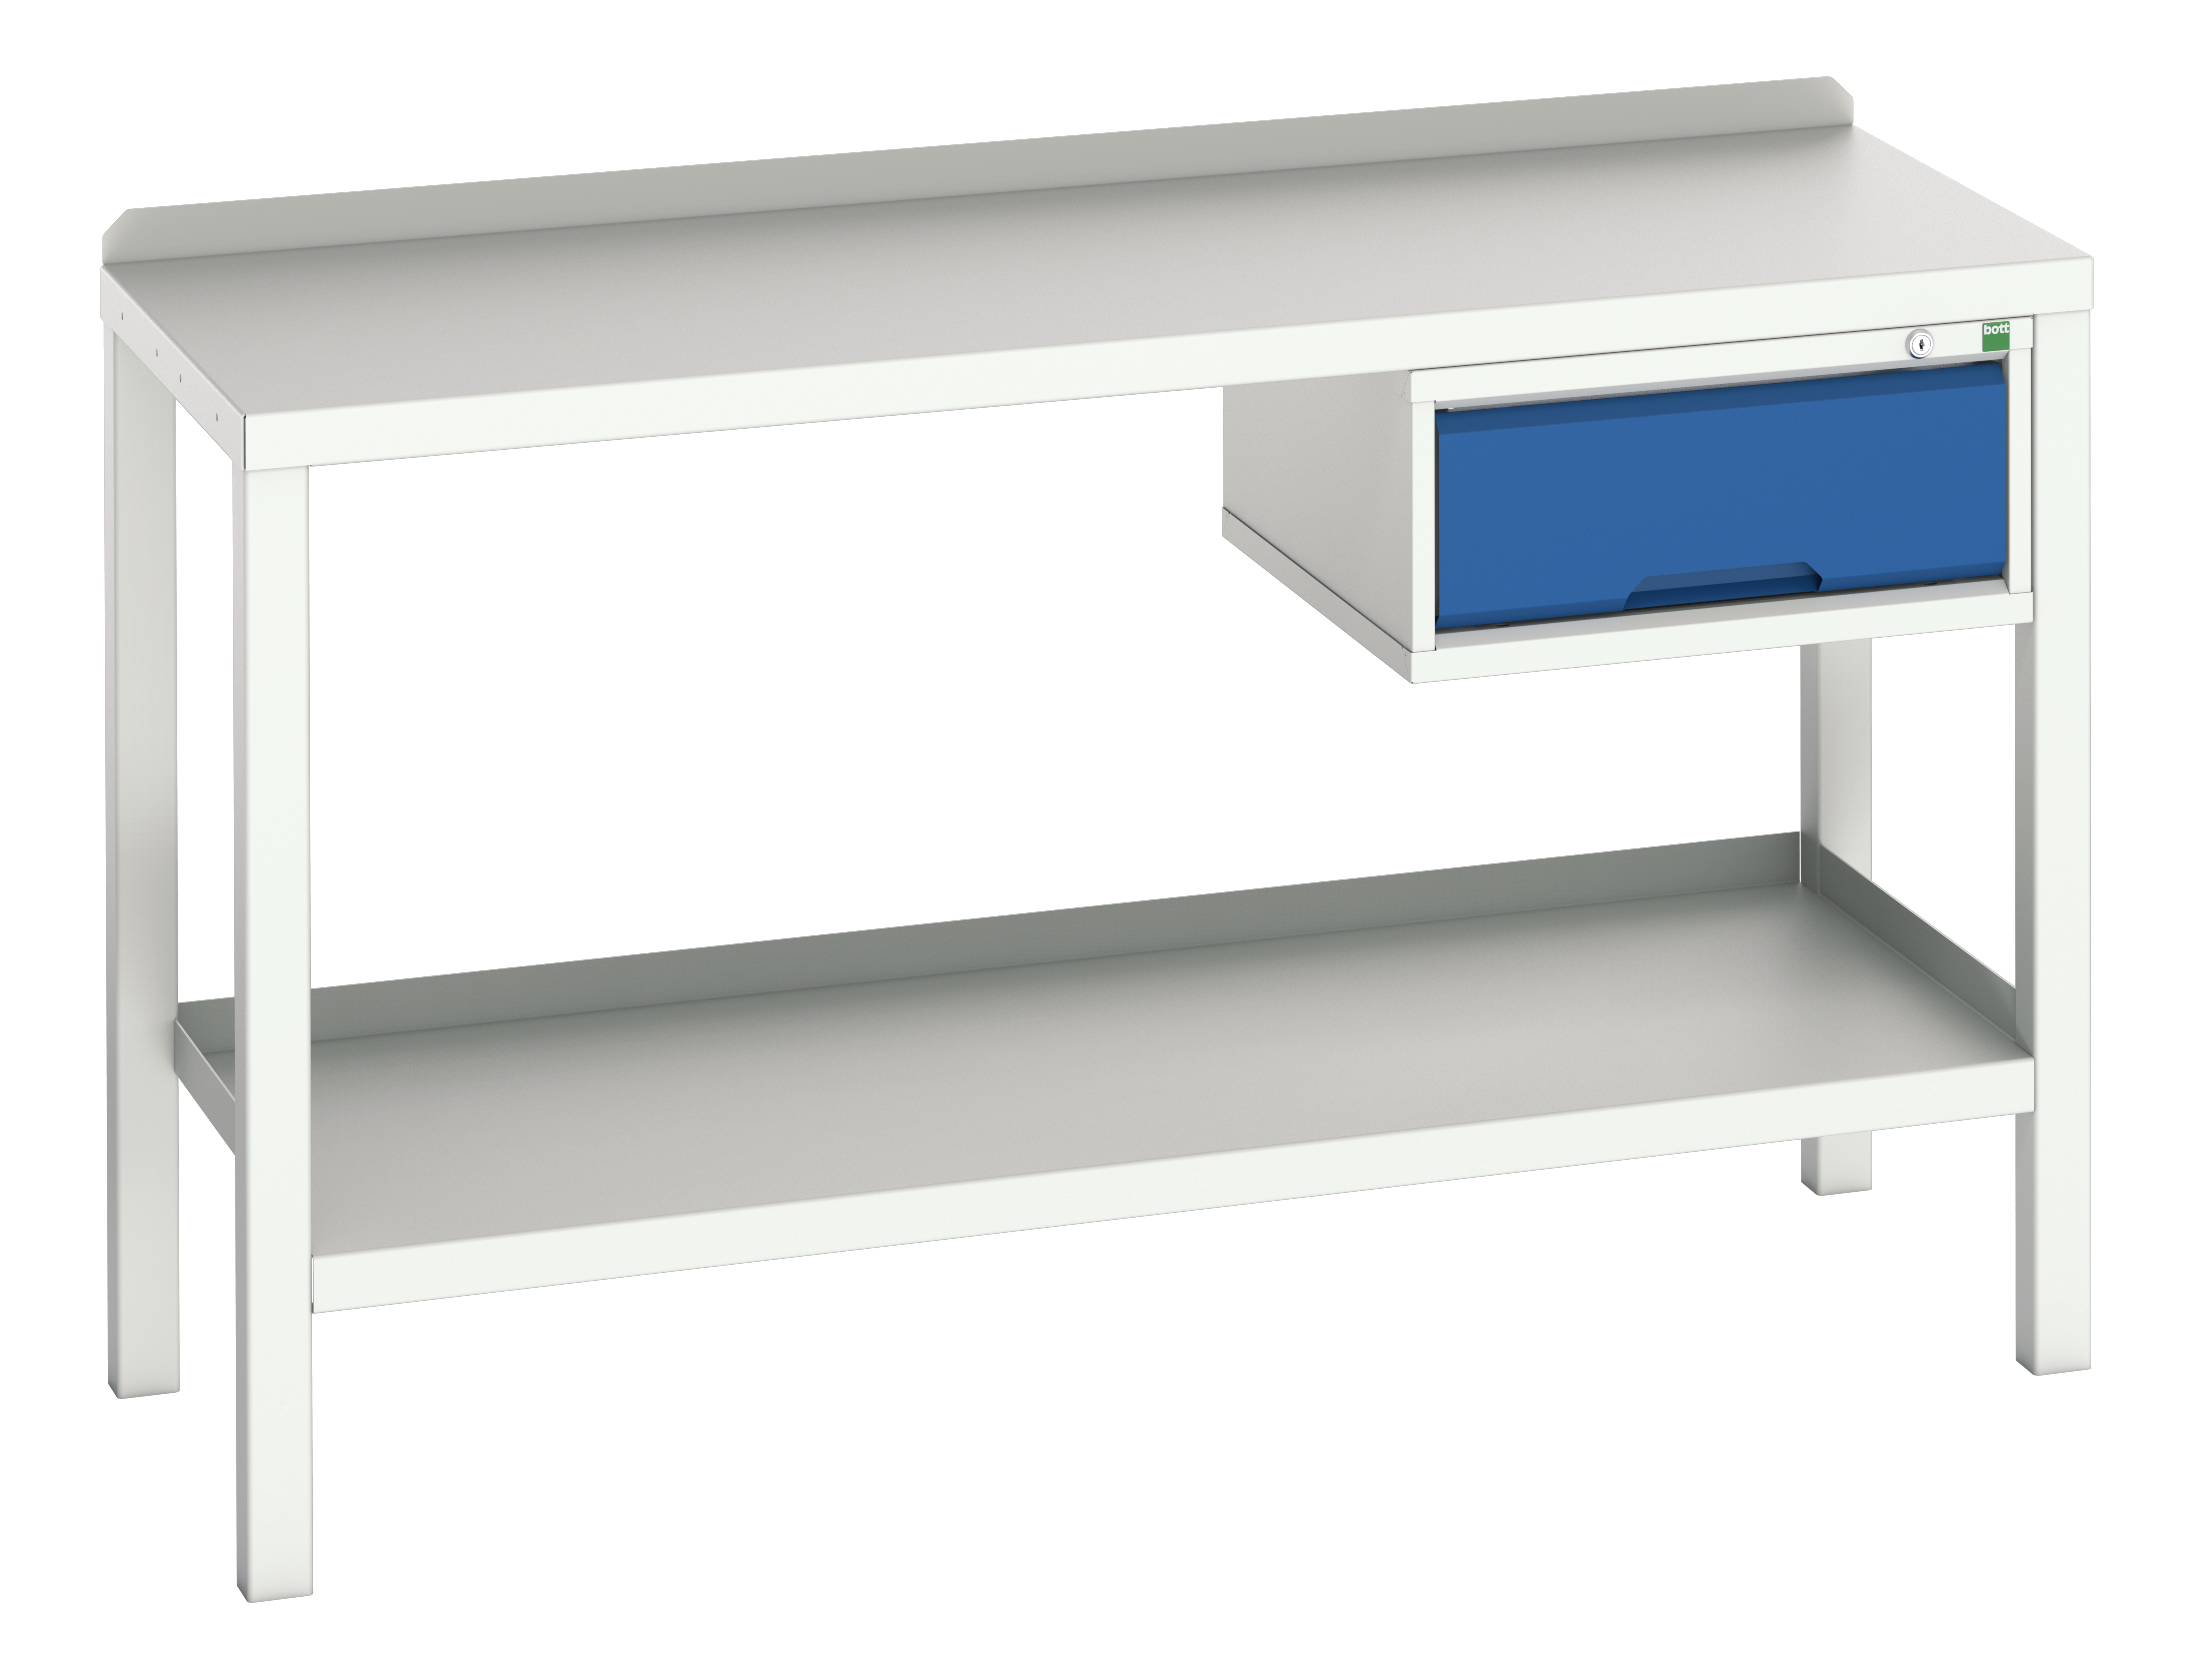 Bott Verso Welded Bench With 1 Drawer Cabinet - 16922604.11